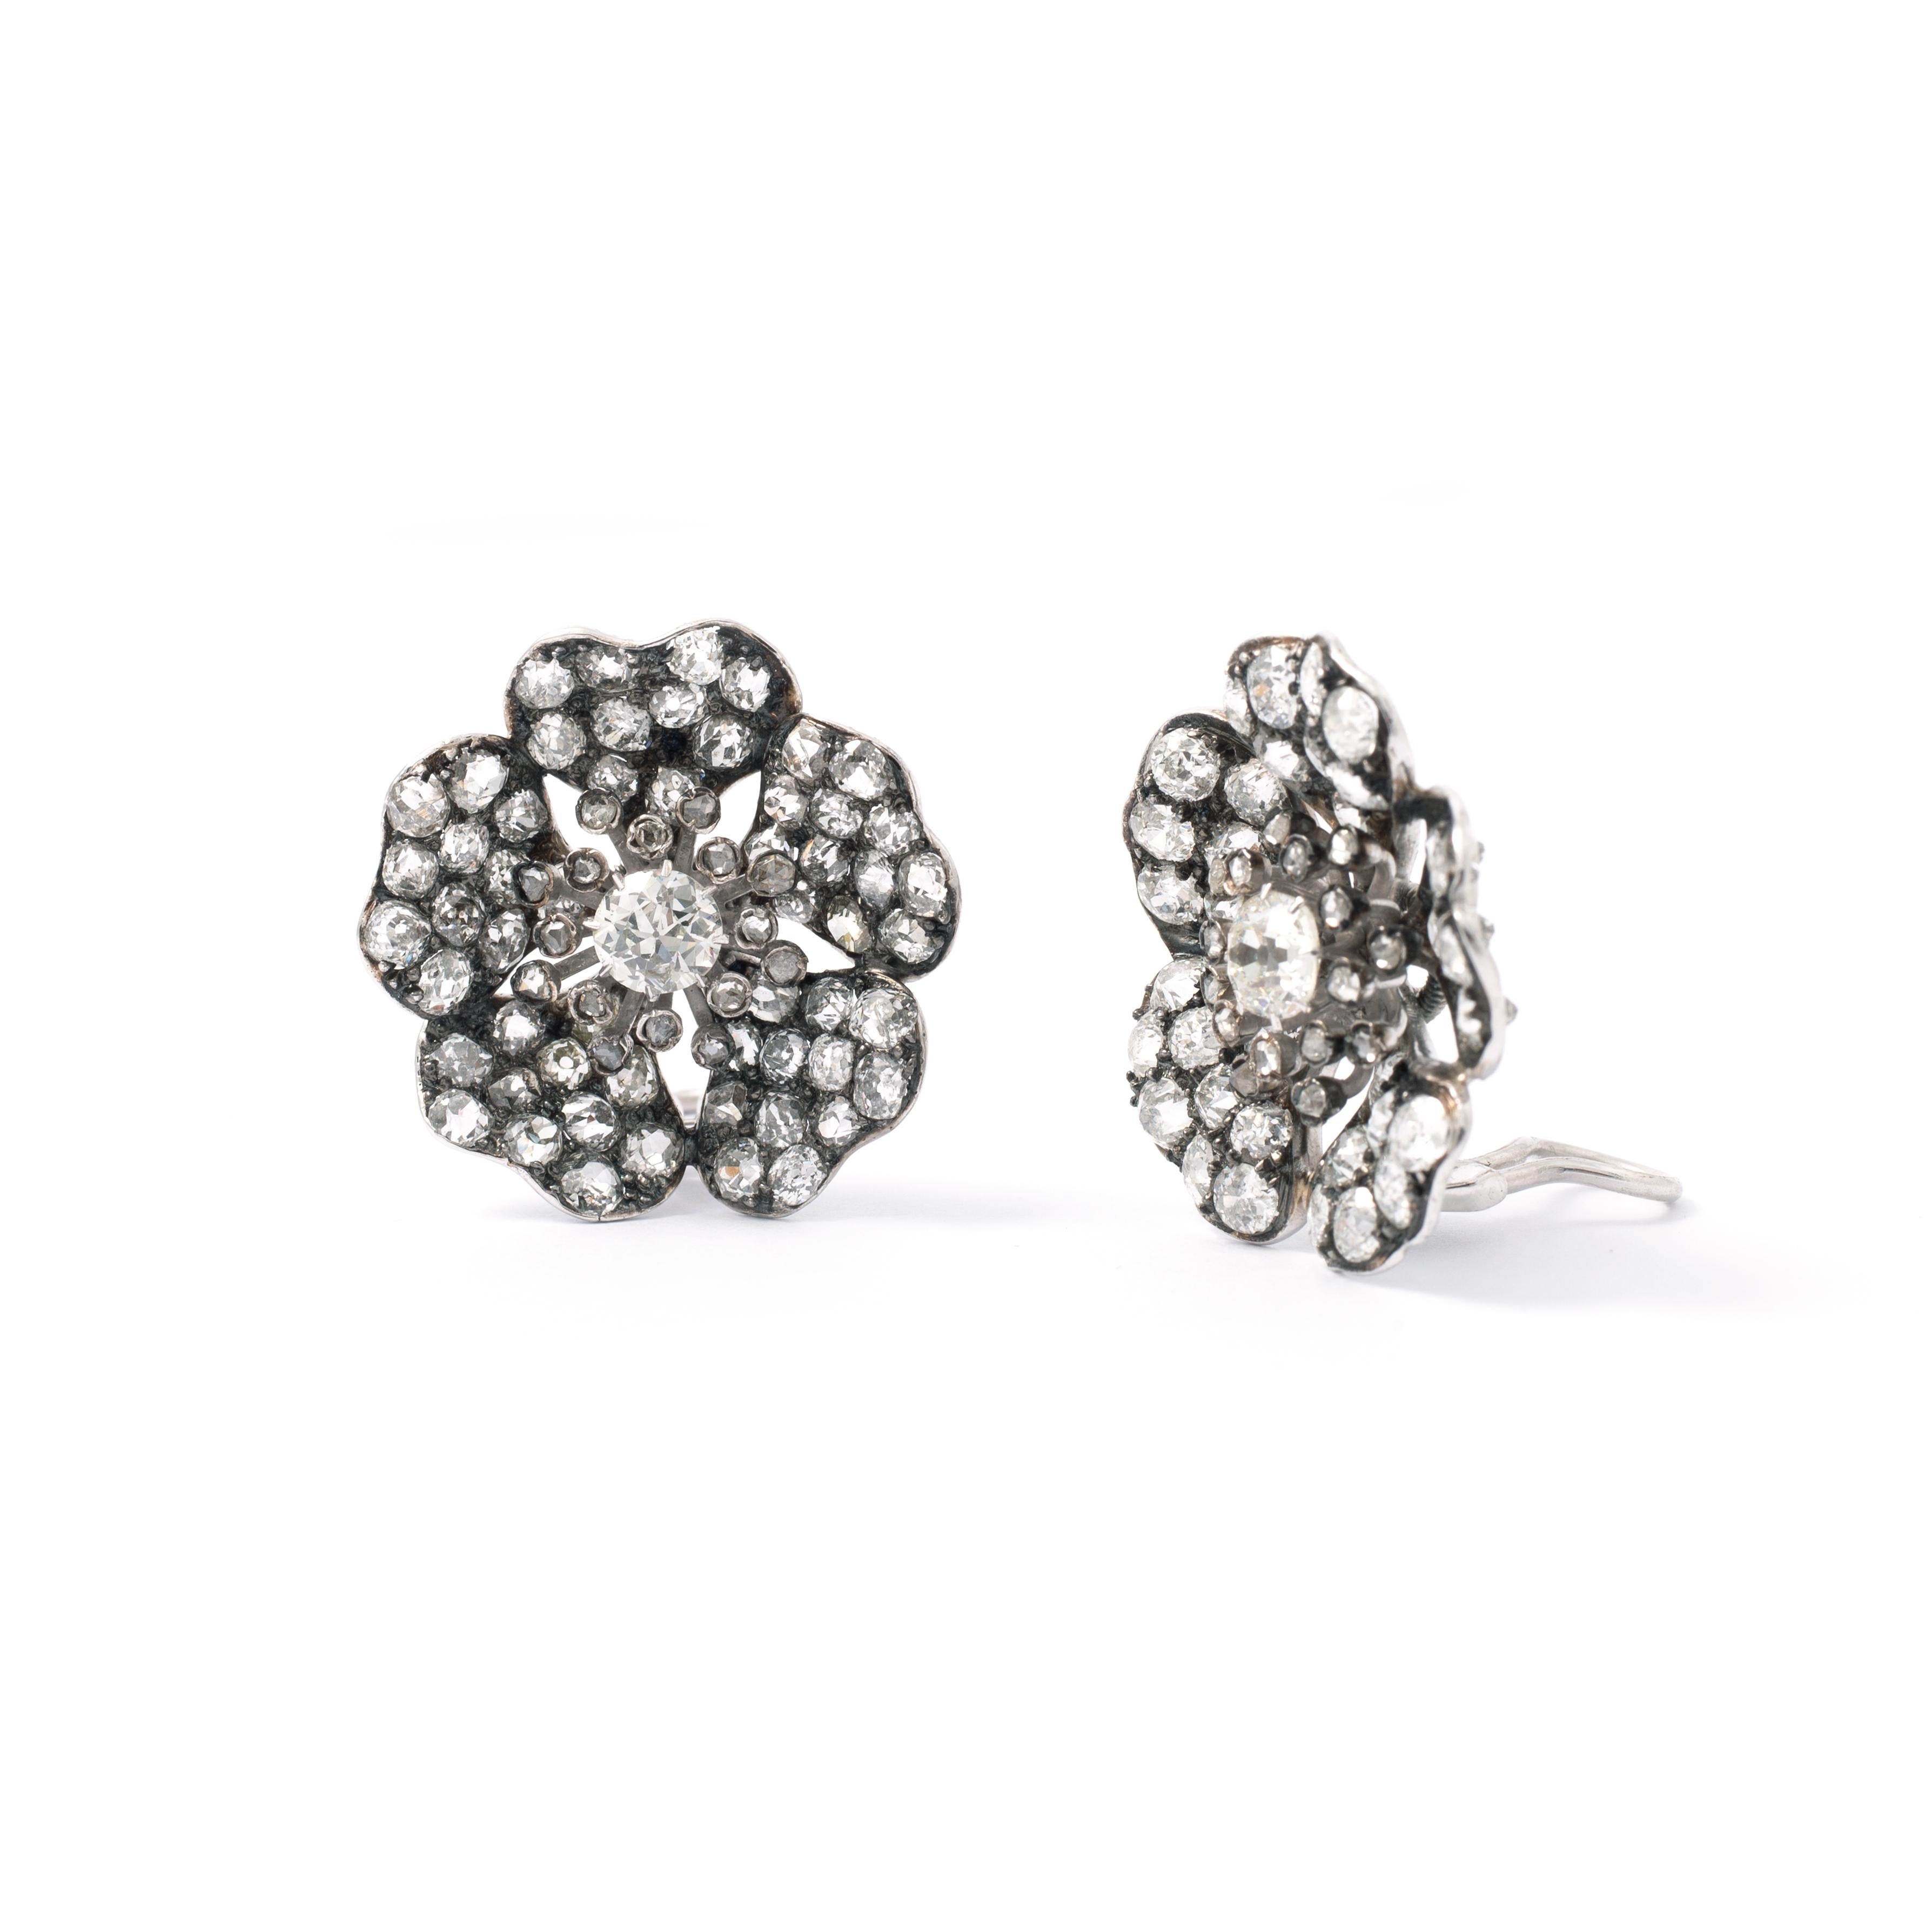 Realistic Old Mine Diamond and white Gold Flower Earclips.